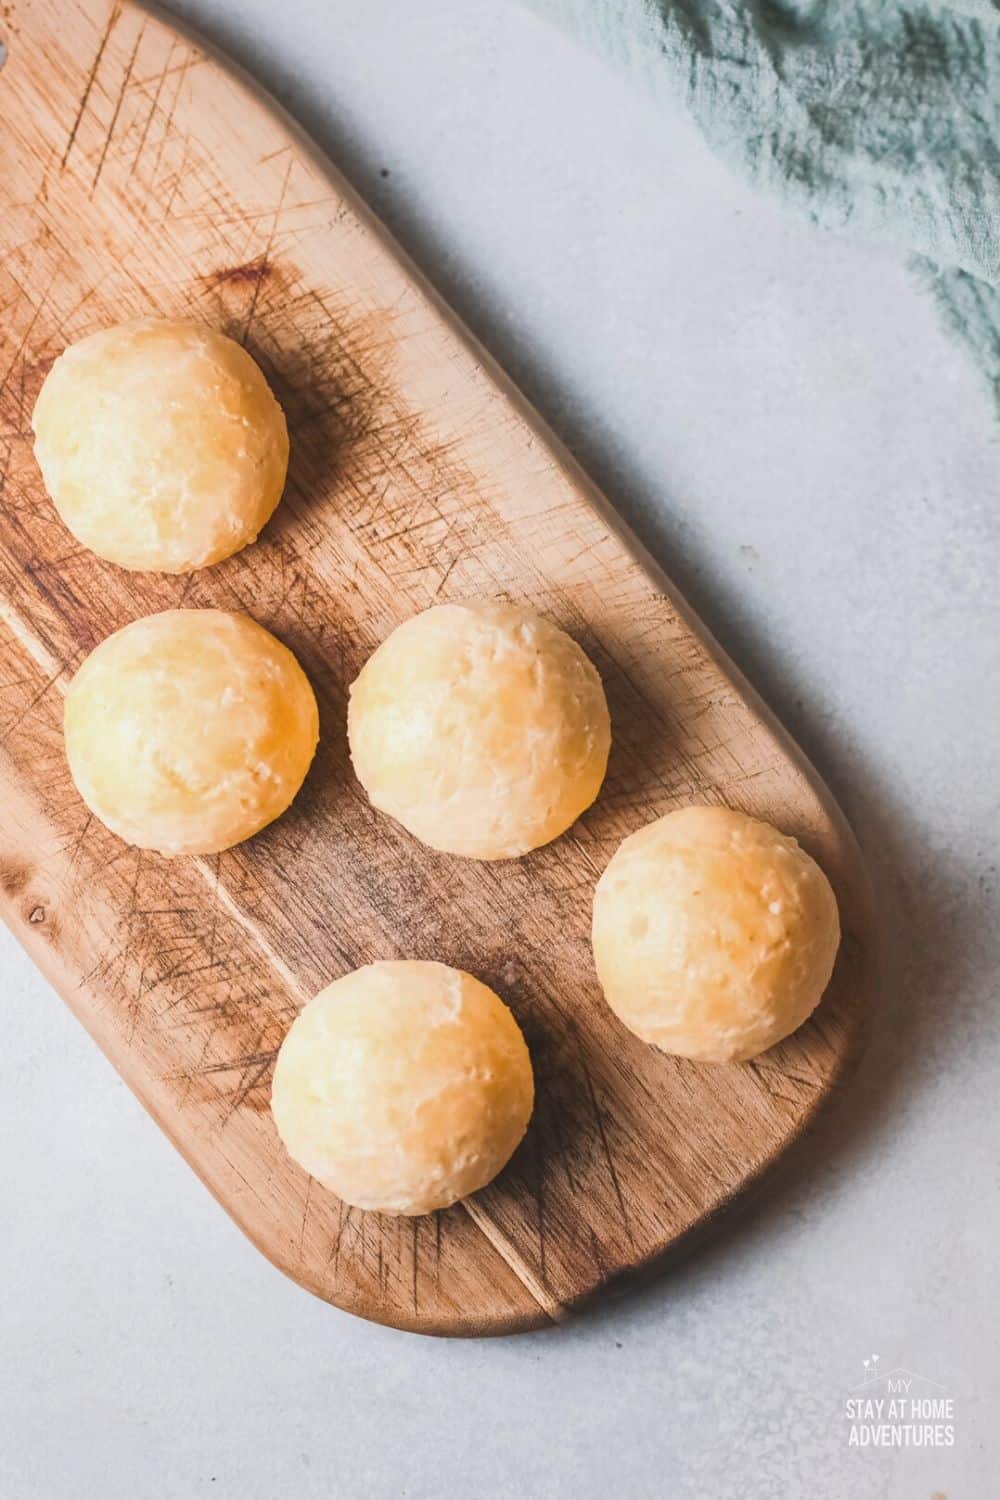 Pandebono or Colombia Cheese Bread is made with cassava starch and queso fresco, and this tasty treat is sure to become a favorite. via @mystayathome